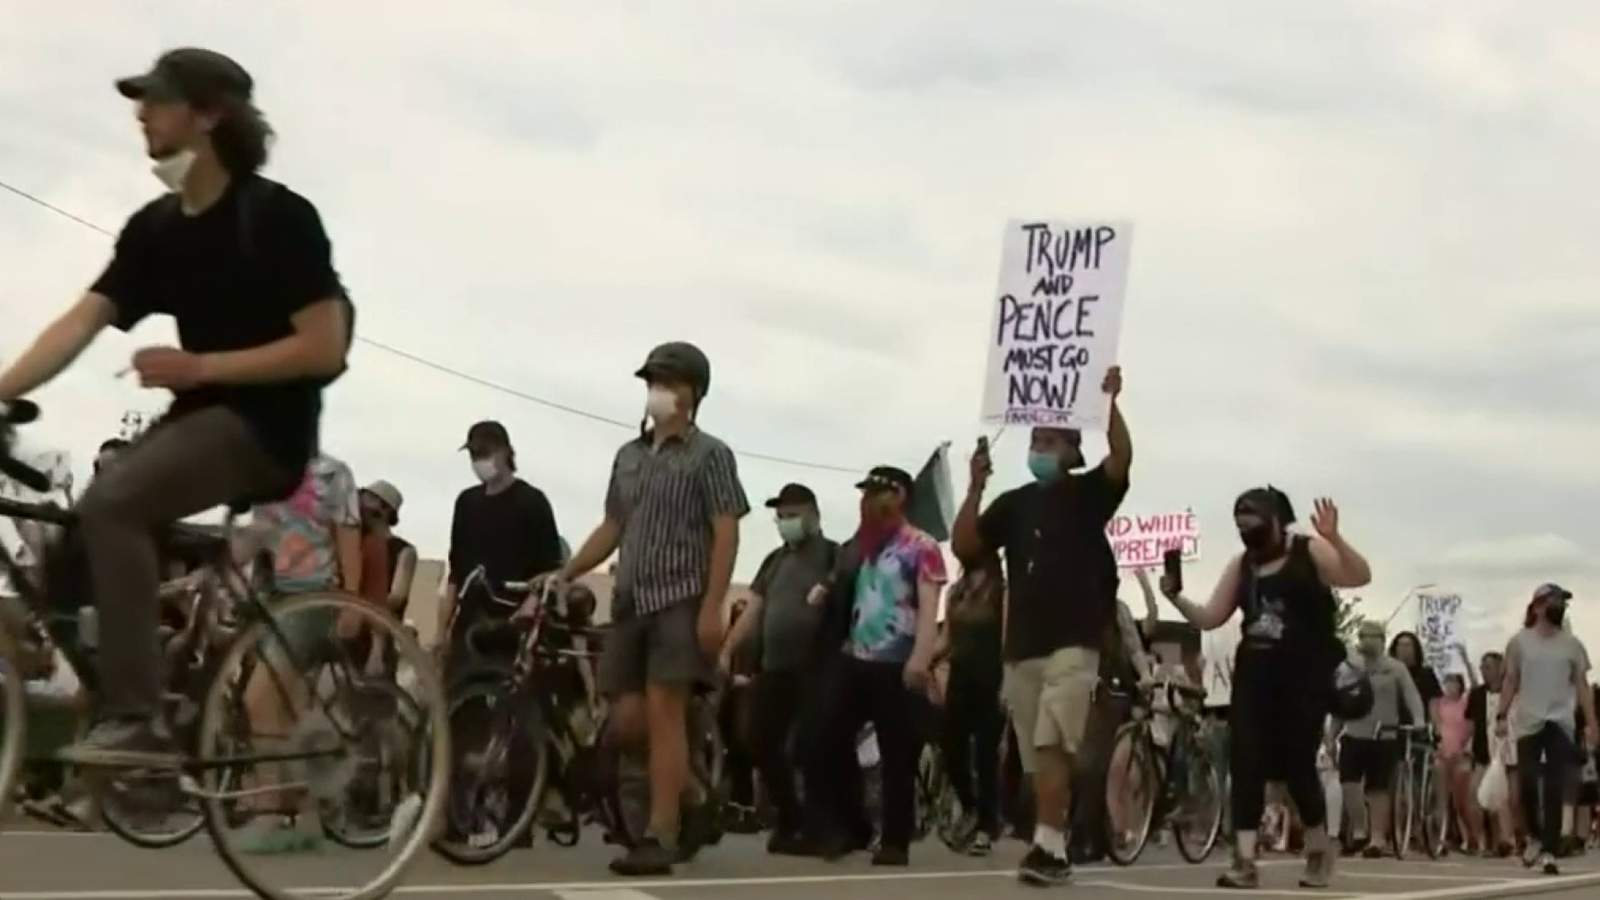 Protests against police brutality planned across Metro Detroit today